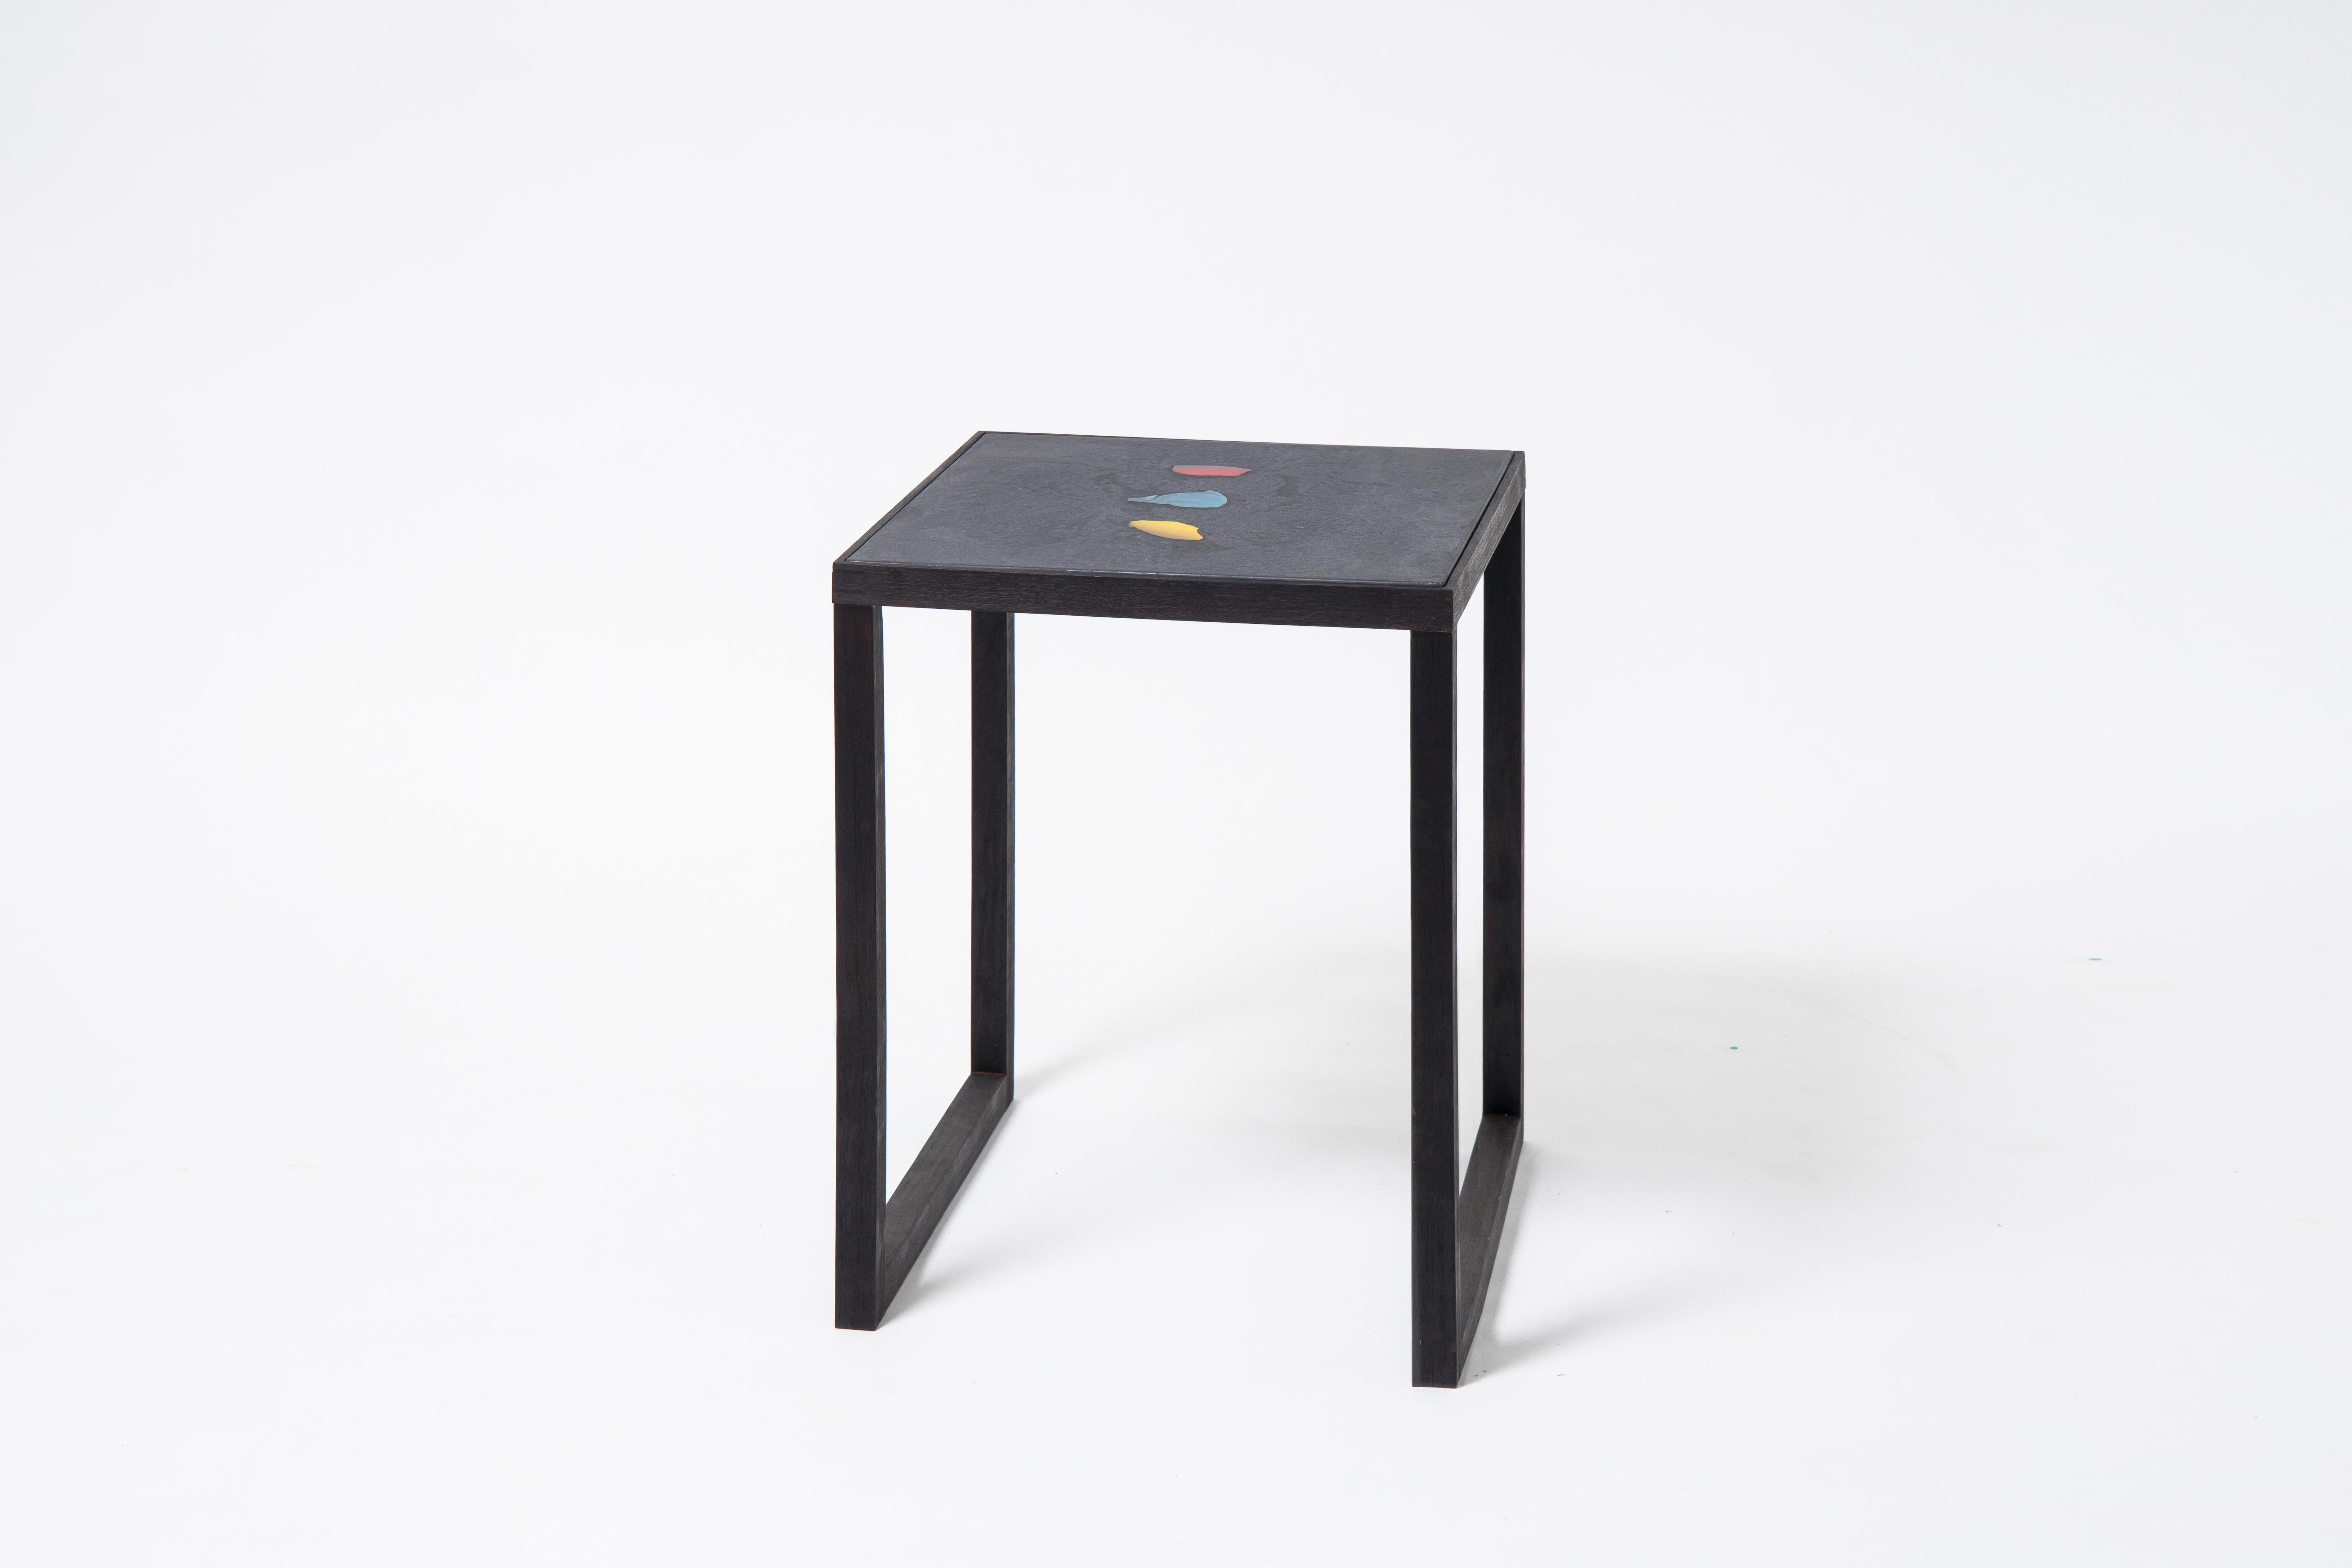 Basis Rho side table (wood) by Studio Jeschkelanger
Dimensions: 50 x 50 x 65 cm
Materials: unique basis Rho tabletop, stained oak wood frame, handcrafted
Available colors: slate, gravel, grape; tableframe: black

Basis Rho was developed by